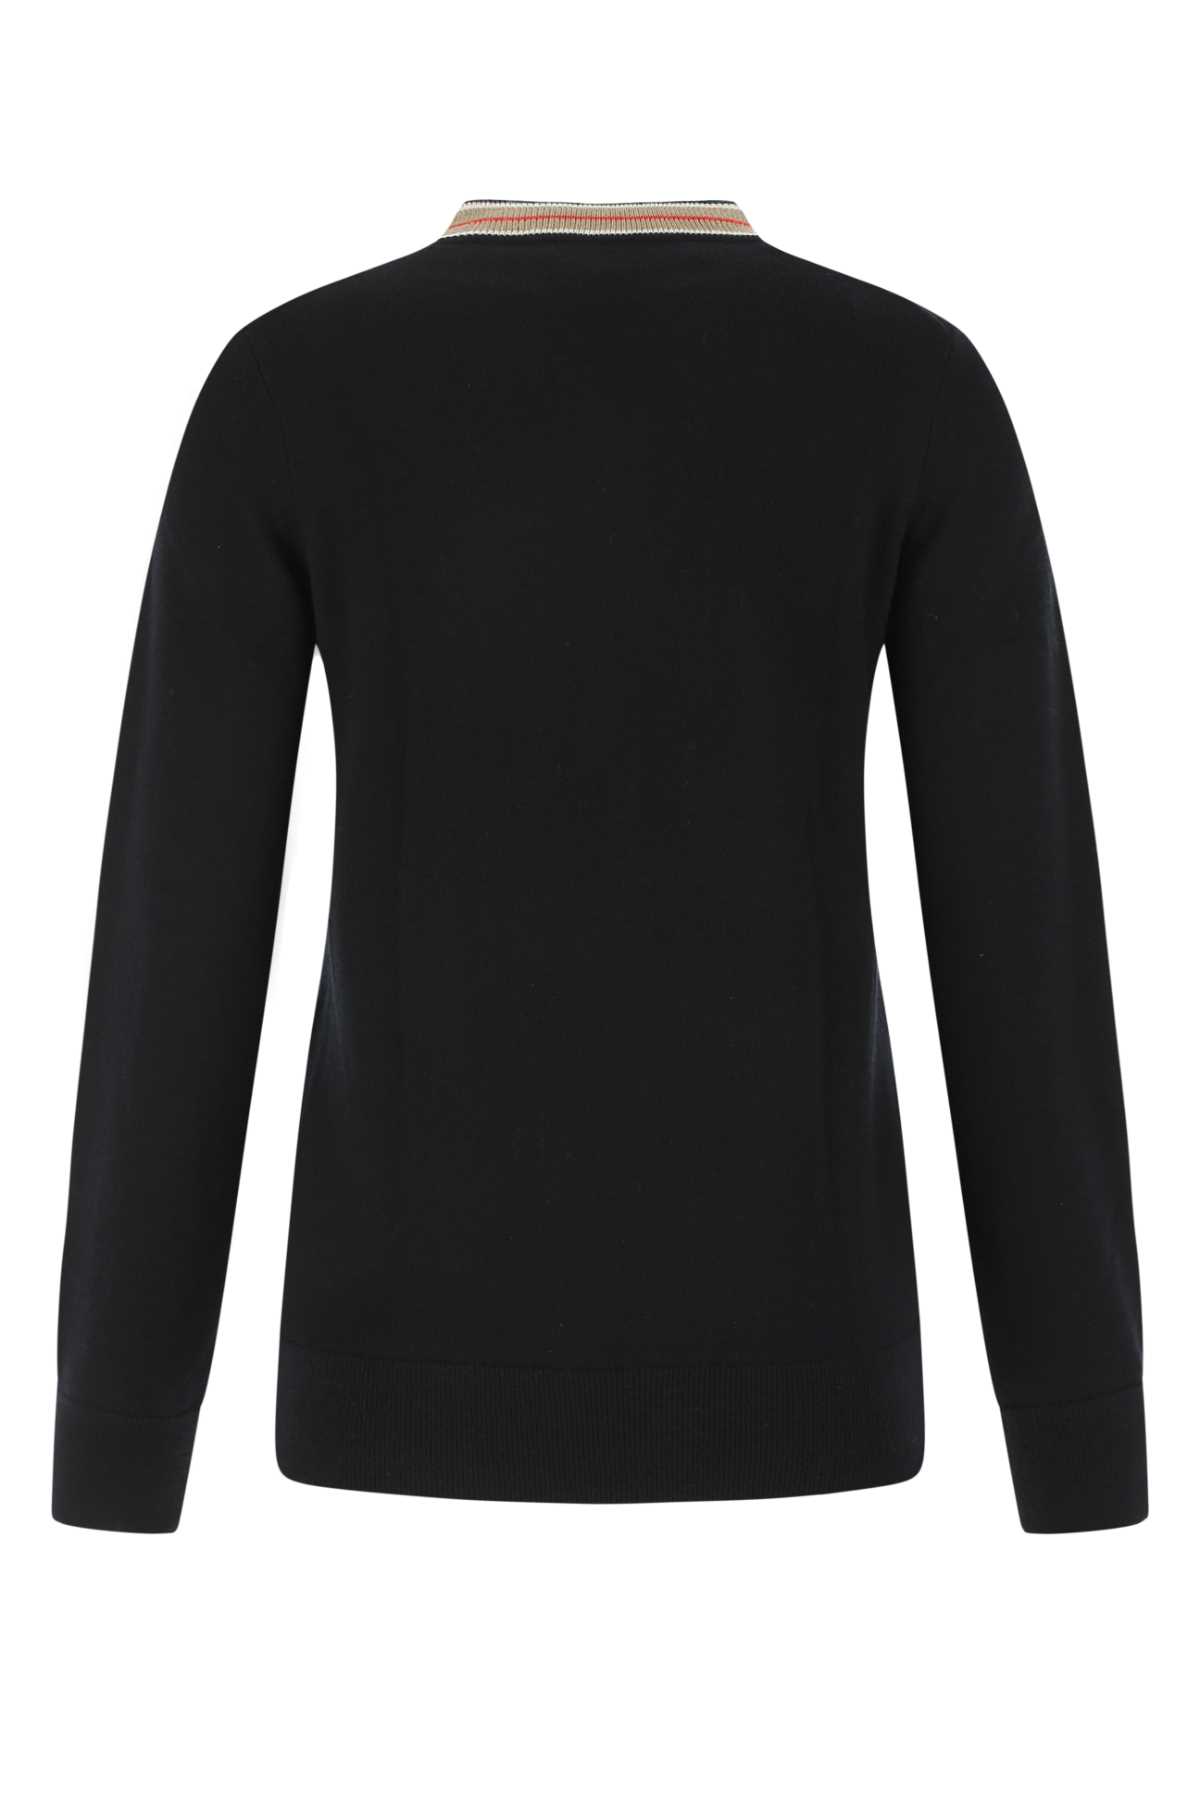 Shop Burberry Black Cashmere Sweater In A1189